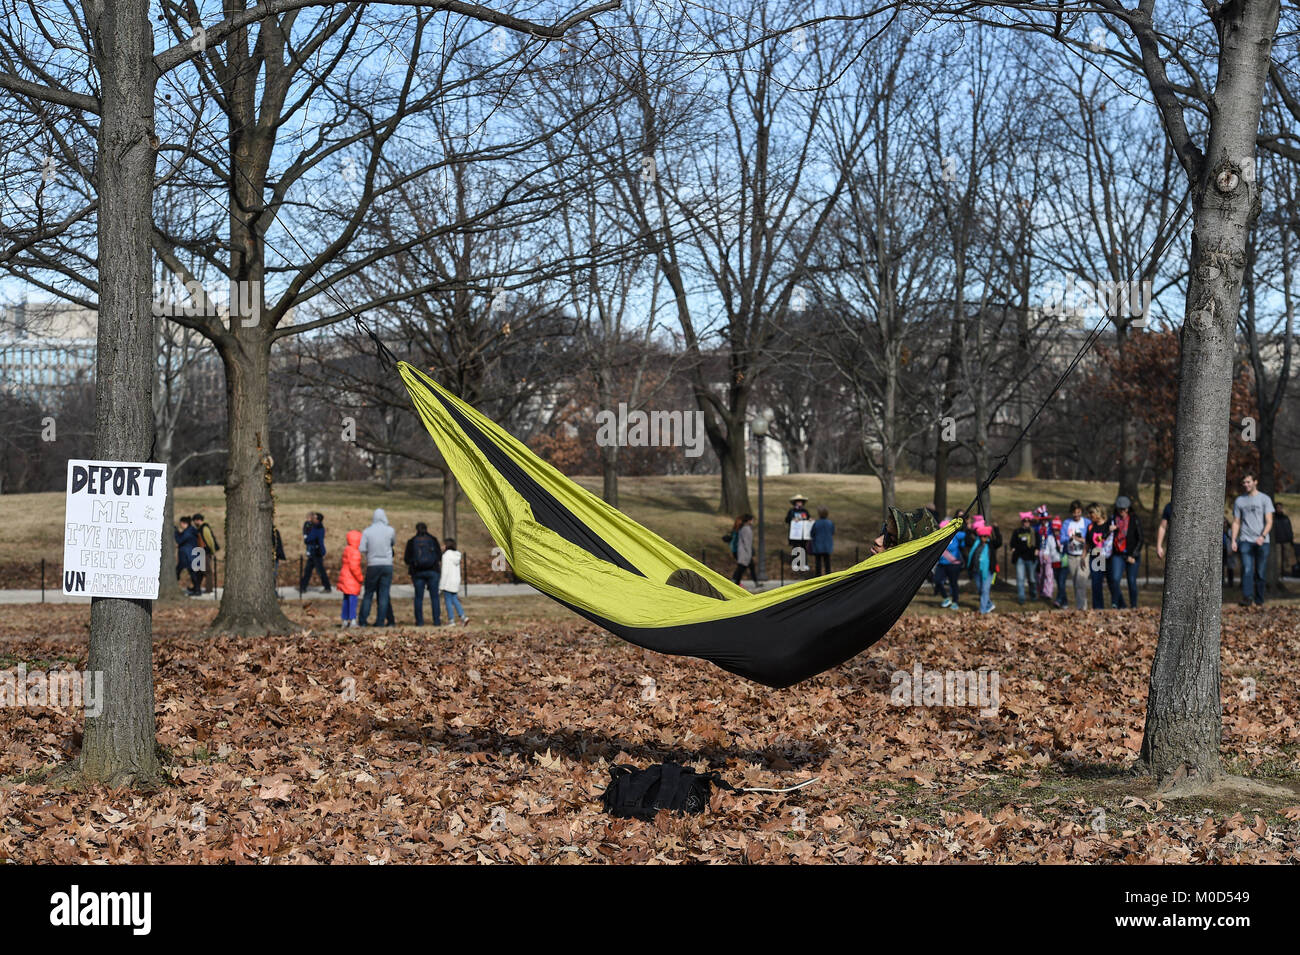 Washington DC, USA. 20th Jan, 2018. Jan. 20th Jan, 2018. A man rests in a hammock with a deport Me sign next to him during the Women's March around Lincoln Memorial in Washington, DC, on Jan. 20, 2018 in Washington Credit: csm/Alamy Live News Credit: Cal Sport Media/Alamy Live News Stock Photo